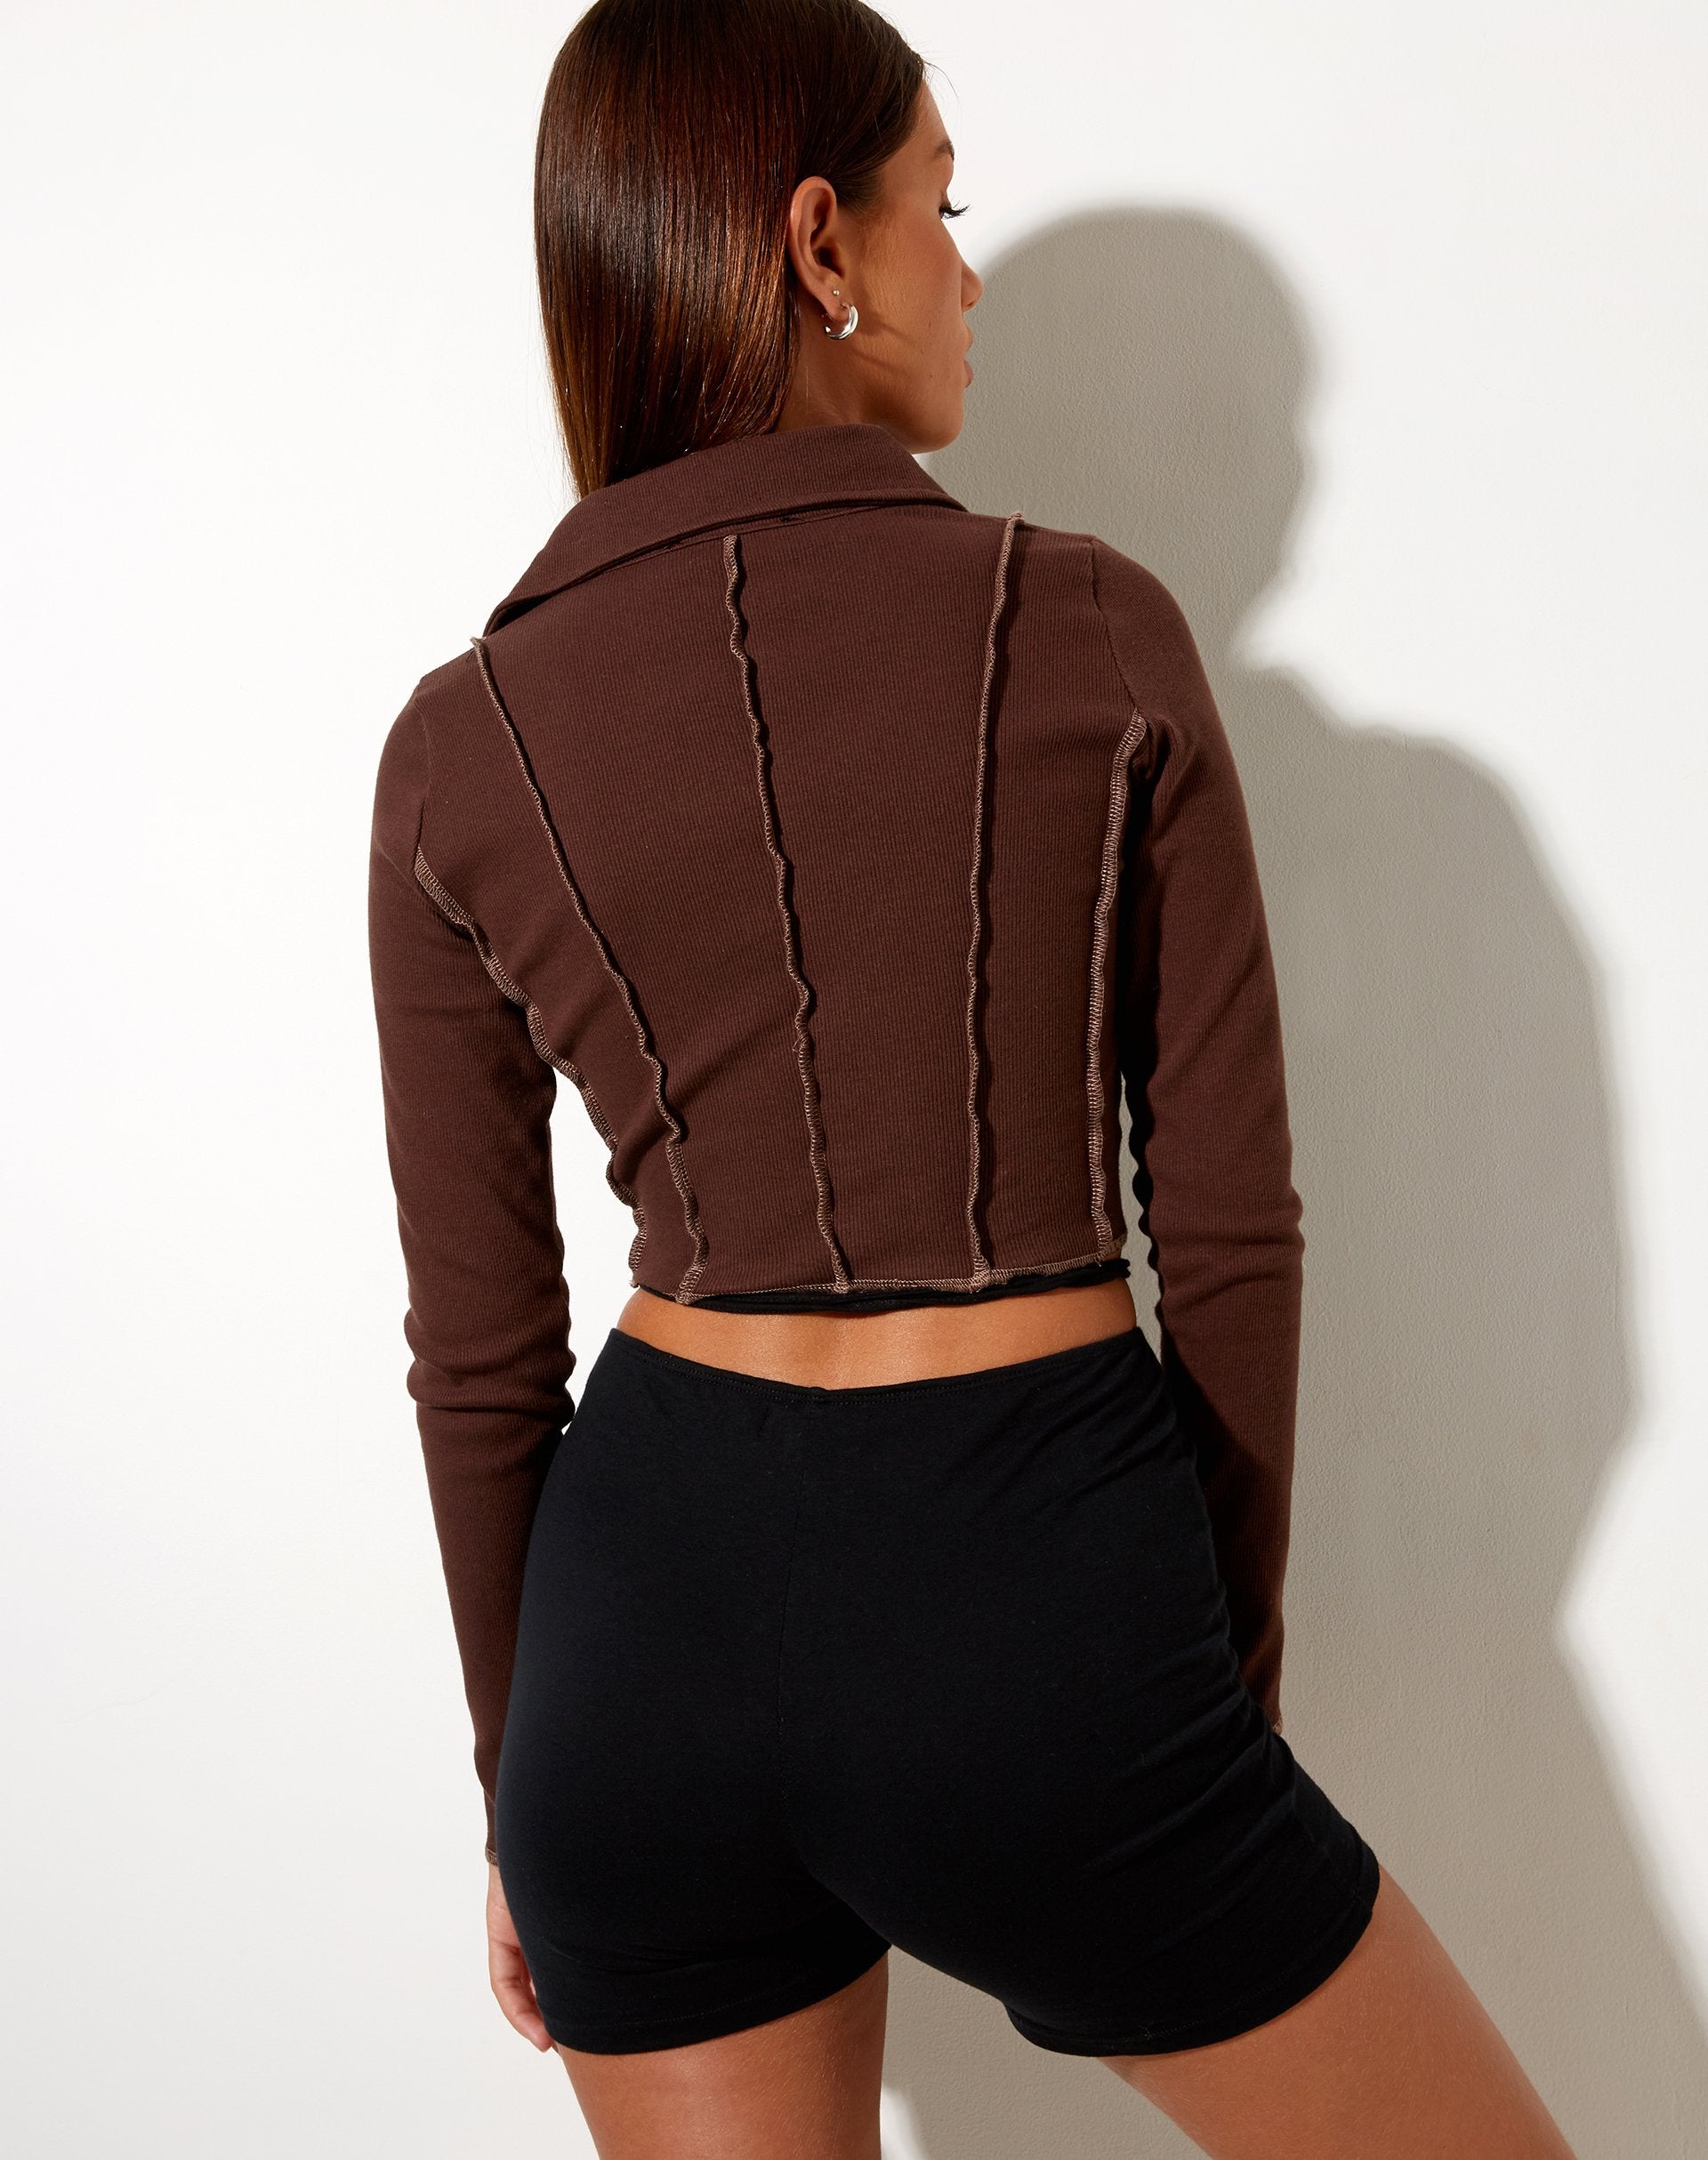 Image of Nandy Crop Top in Rib Deep Mahogany with Brown Stitching